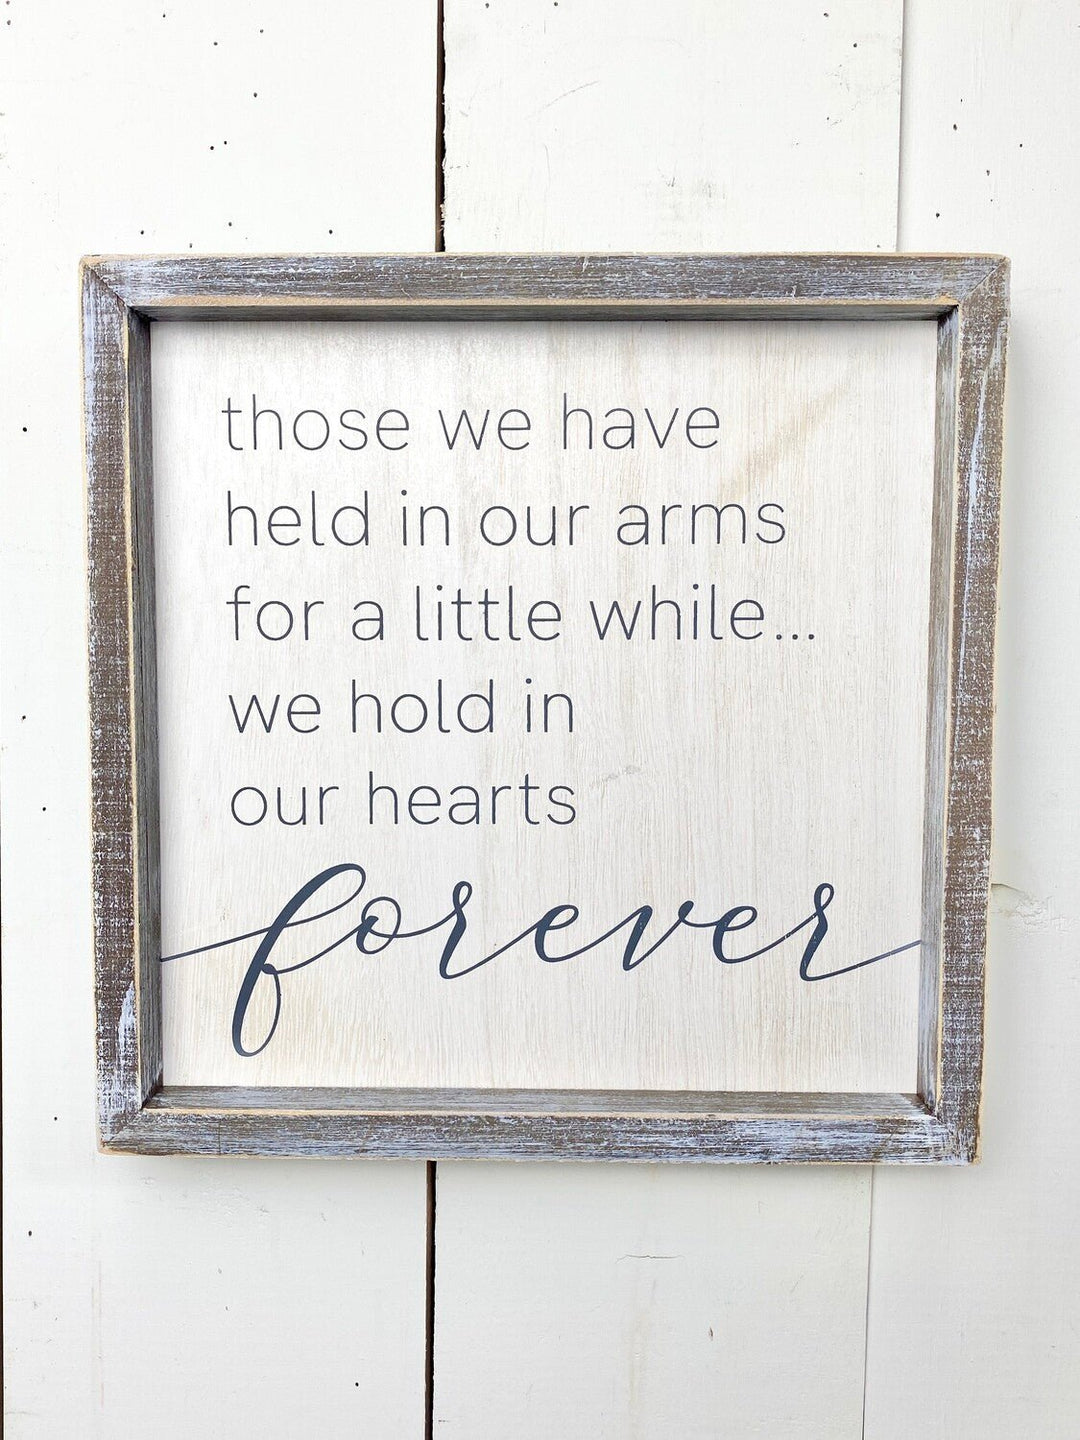 Those We Have Held In Our Arms For A Little While.. Signage